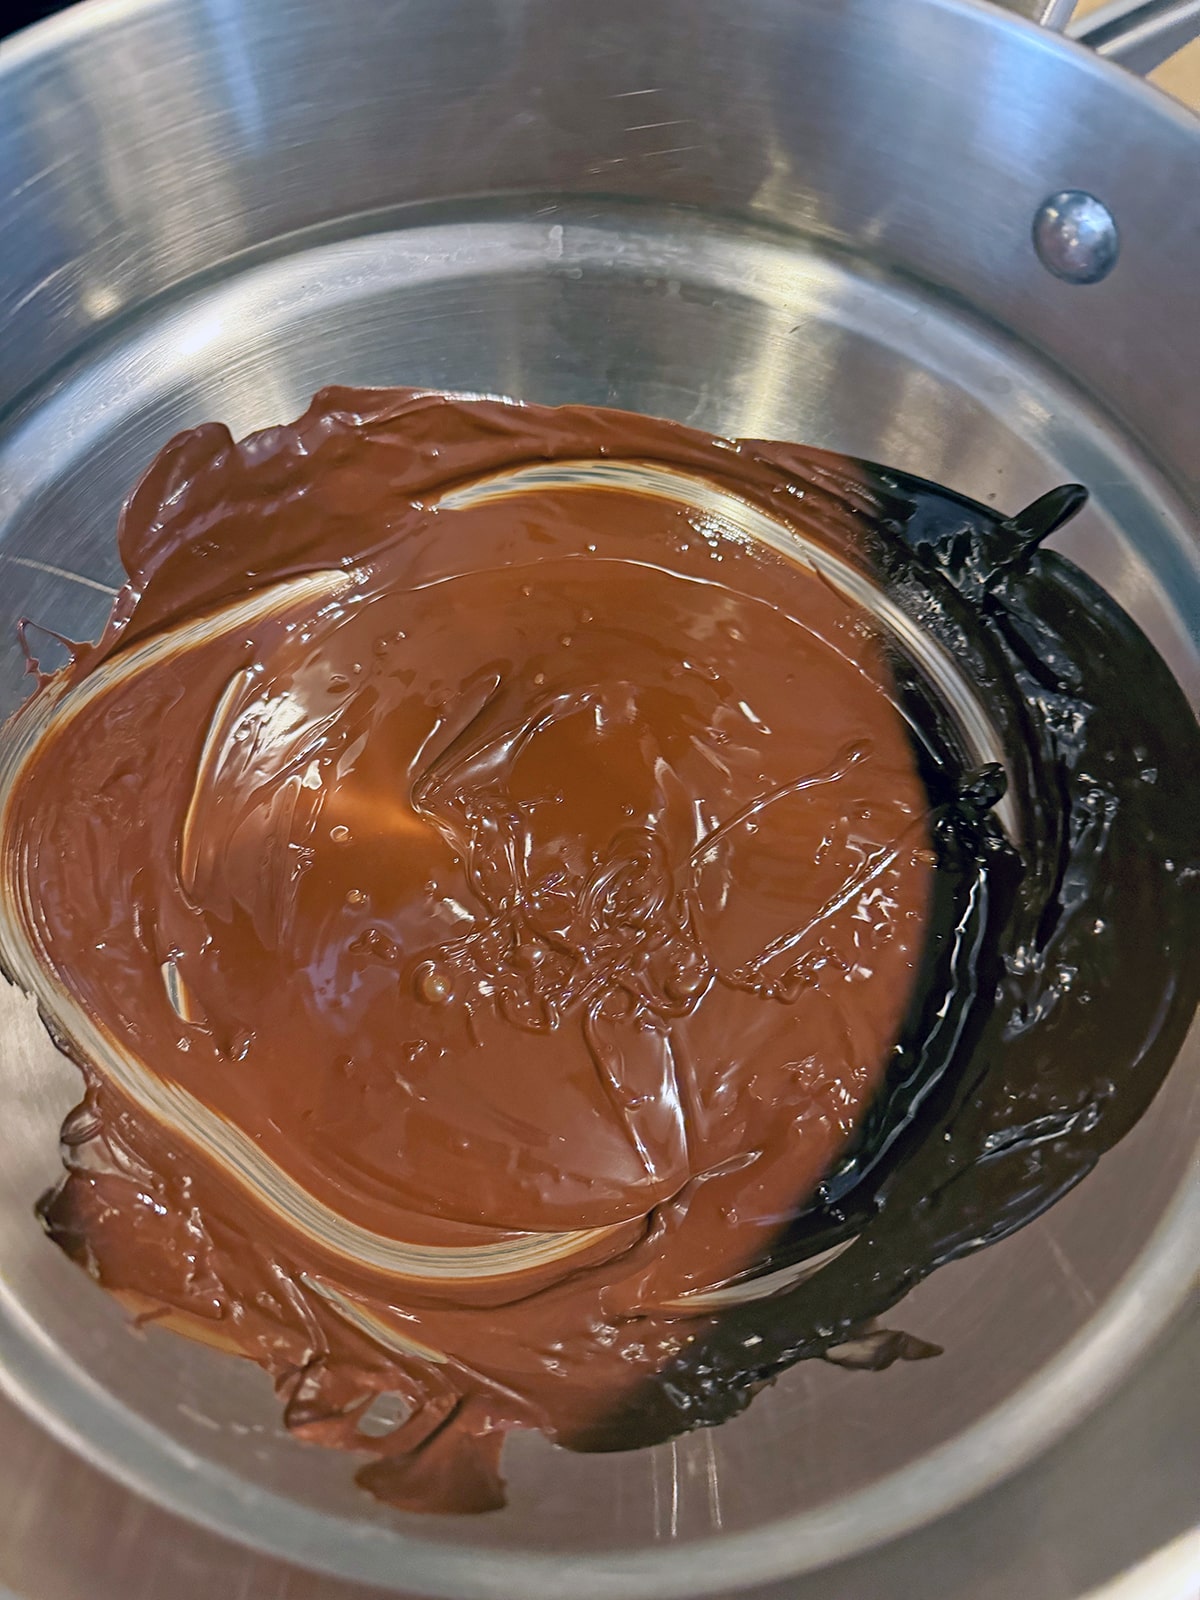 Chocolate melted in double boiler.